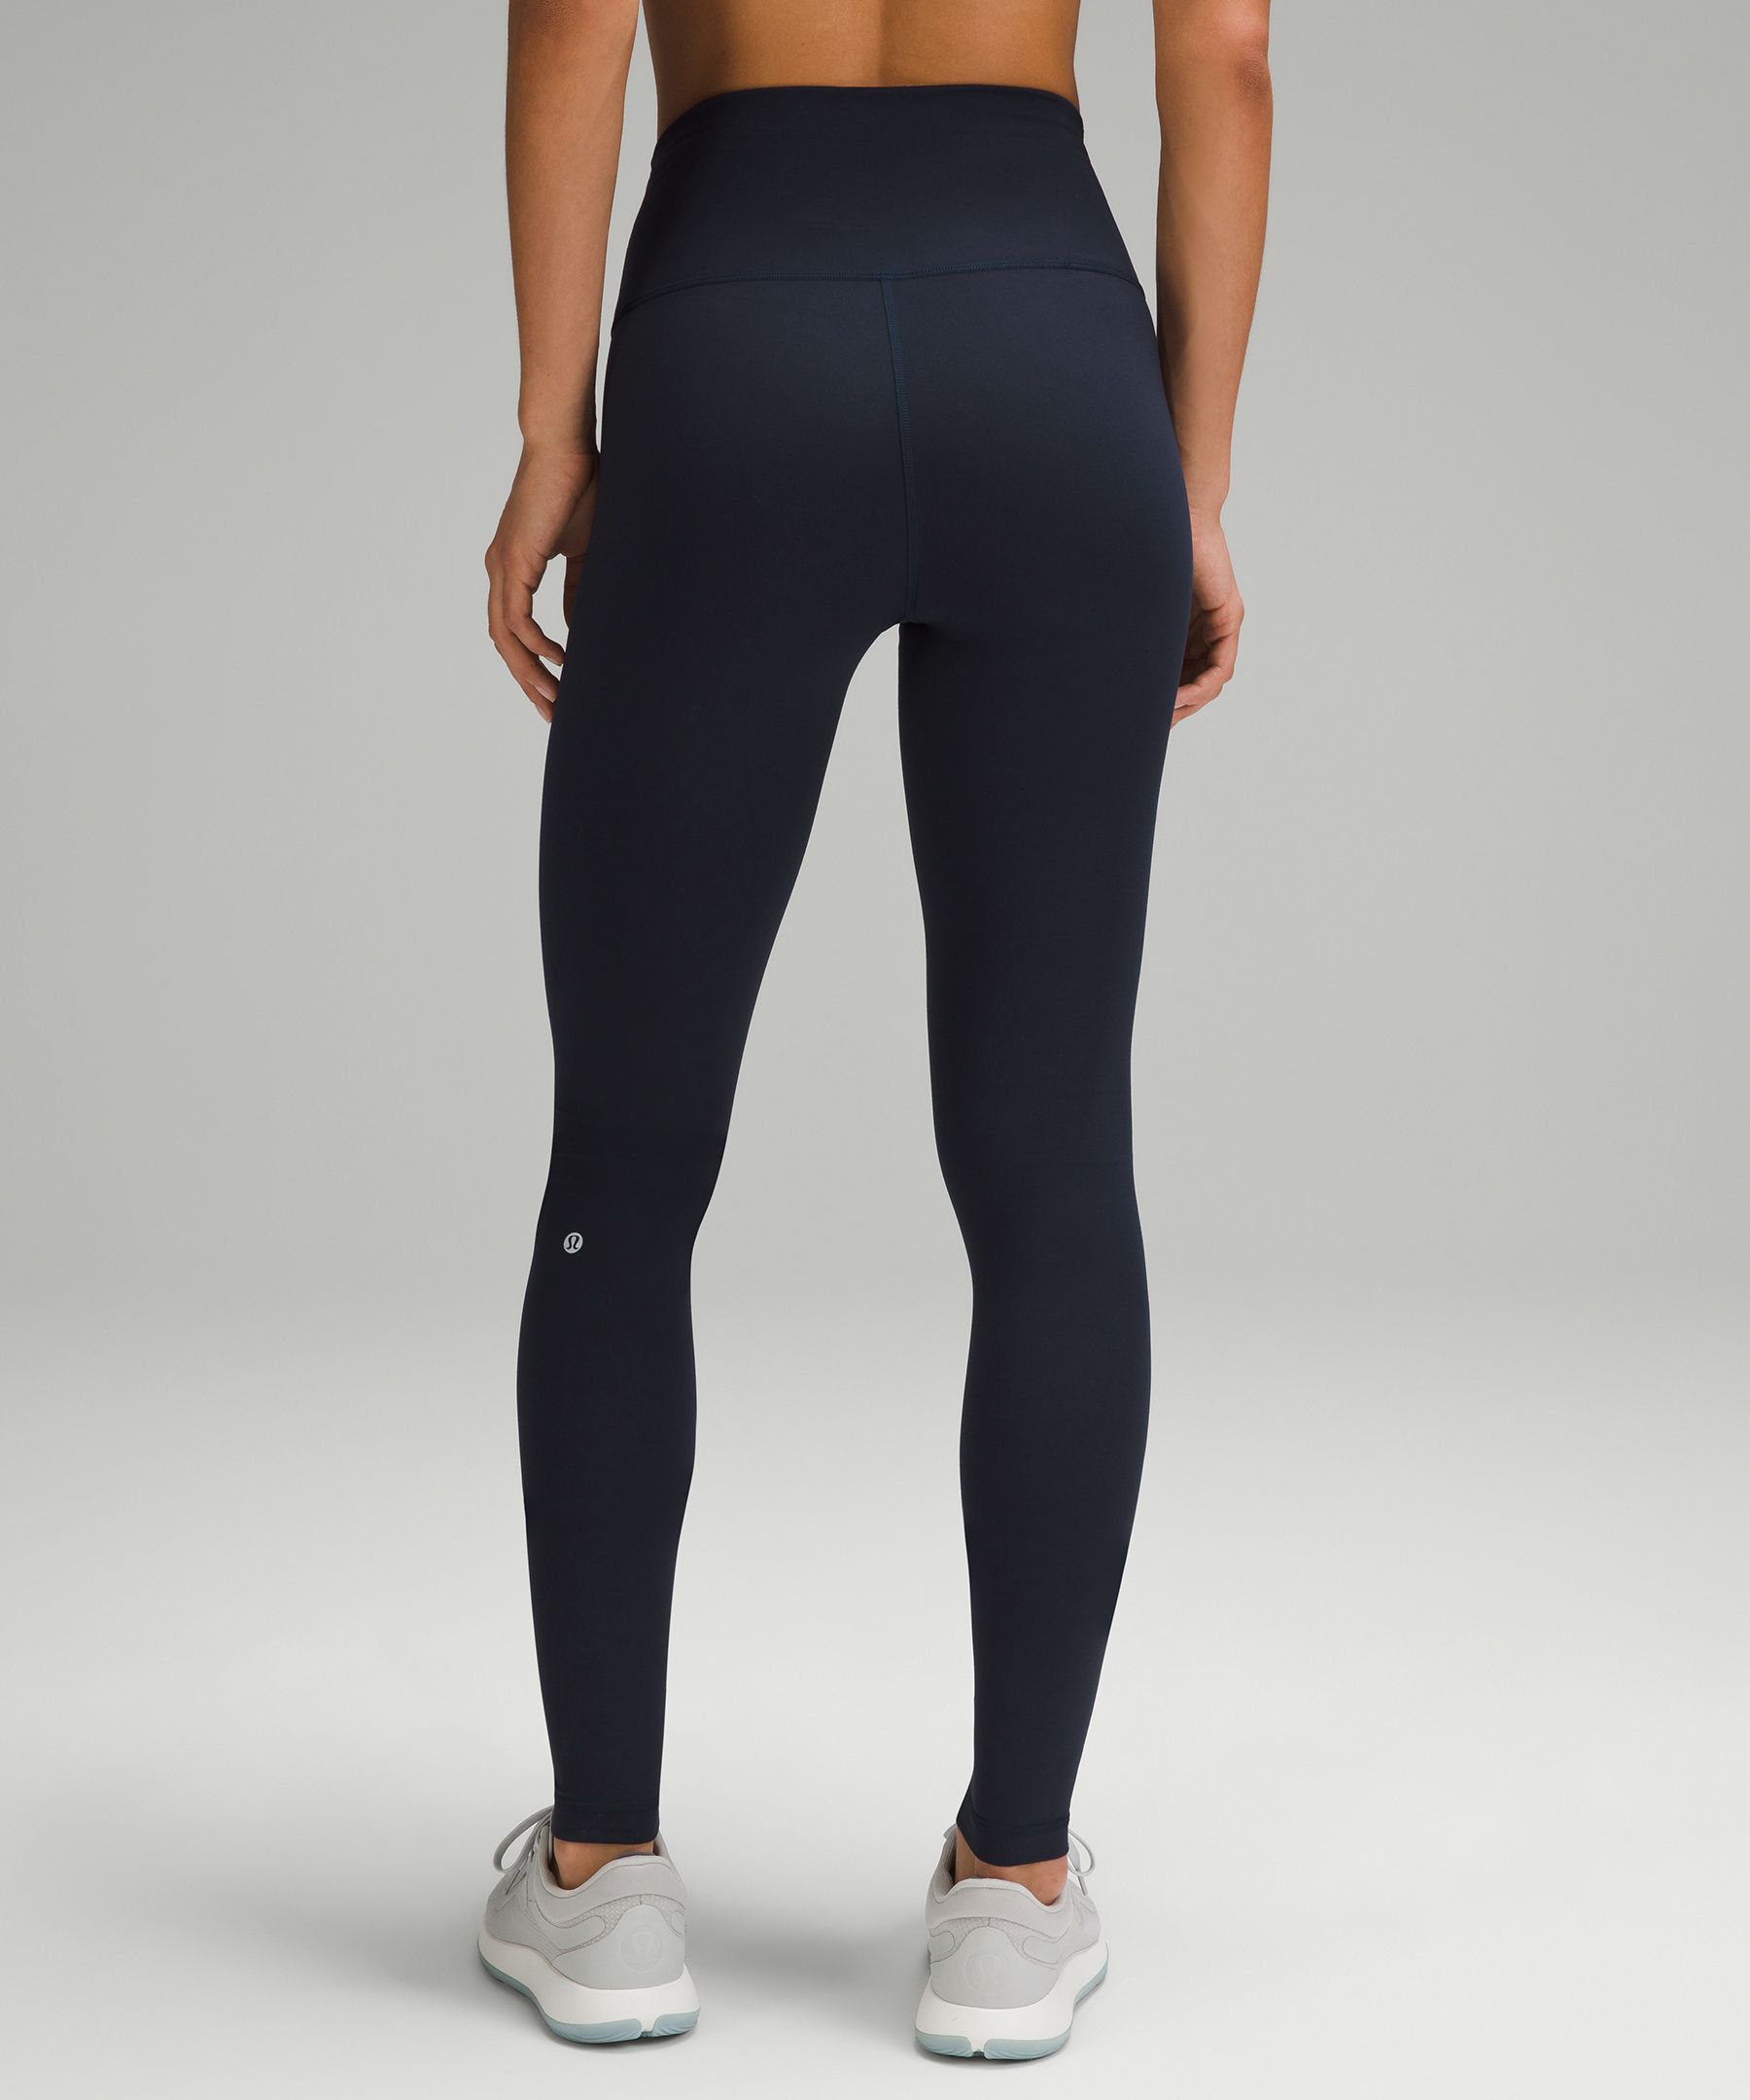 lululemon - The art of subtlety. Our classic Wunder Under Tights